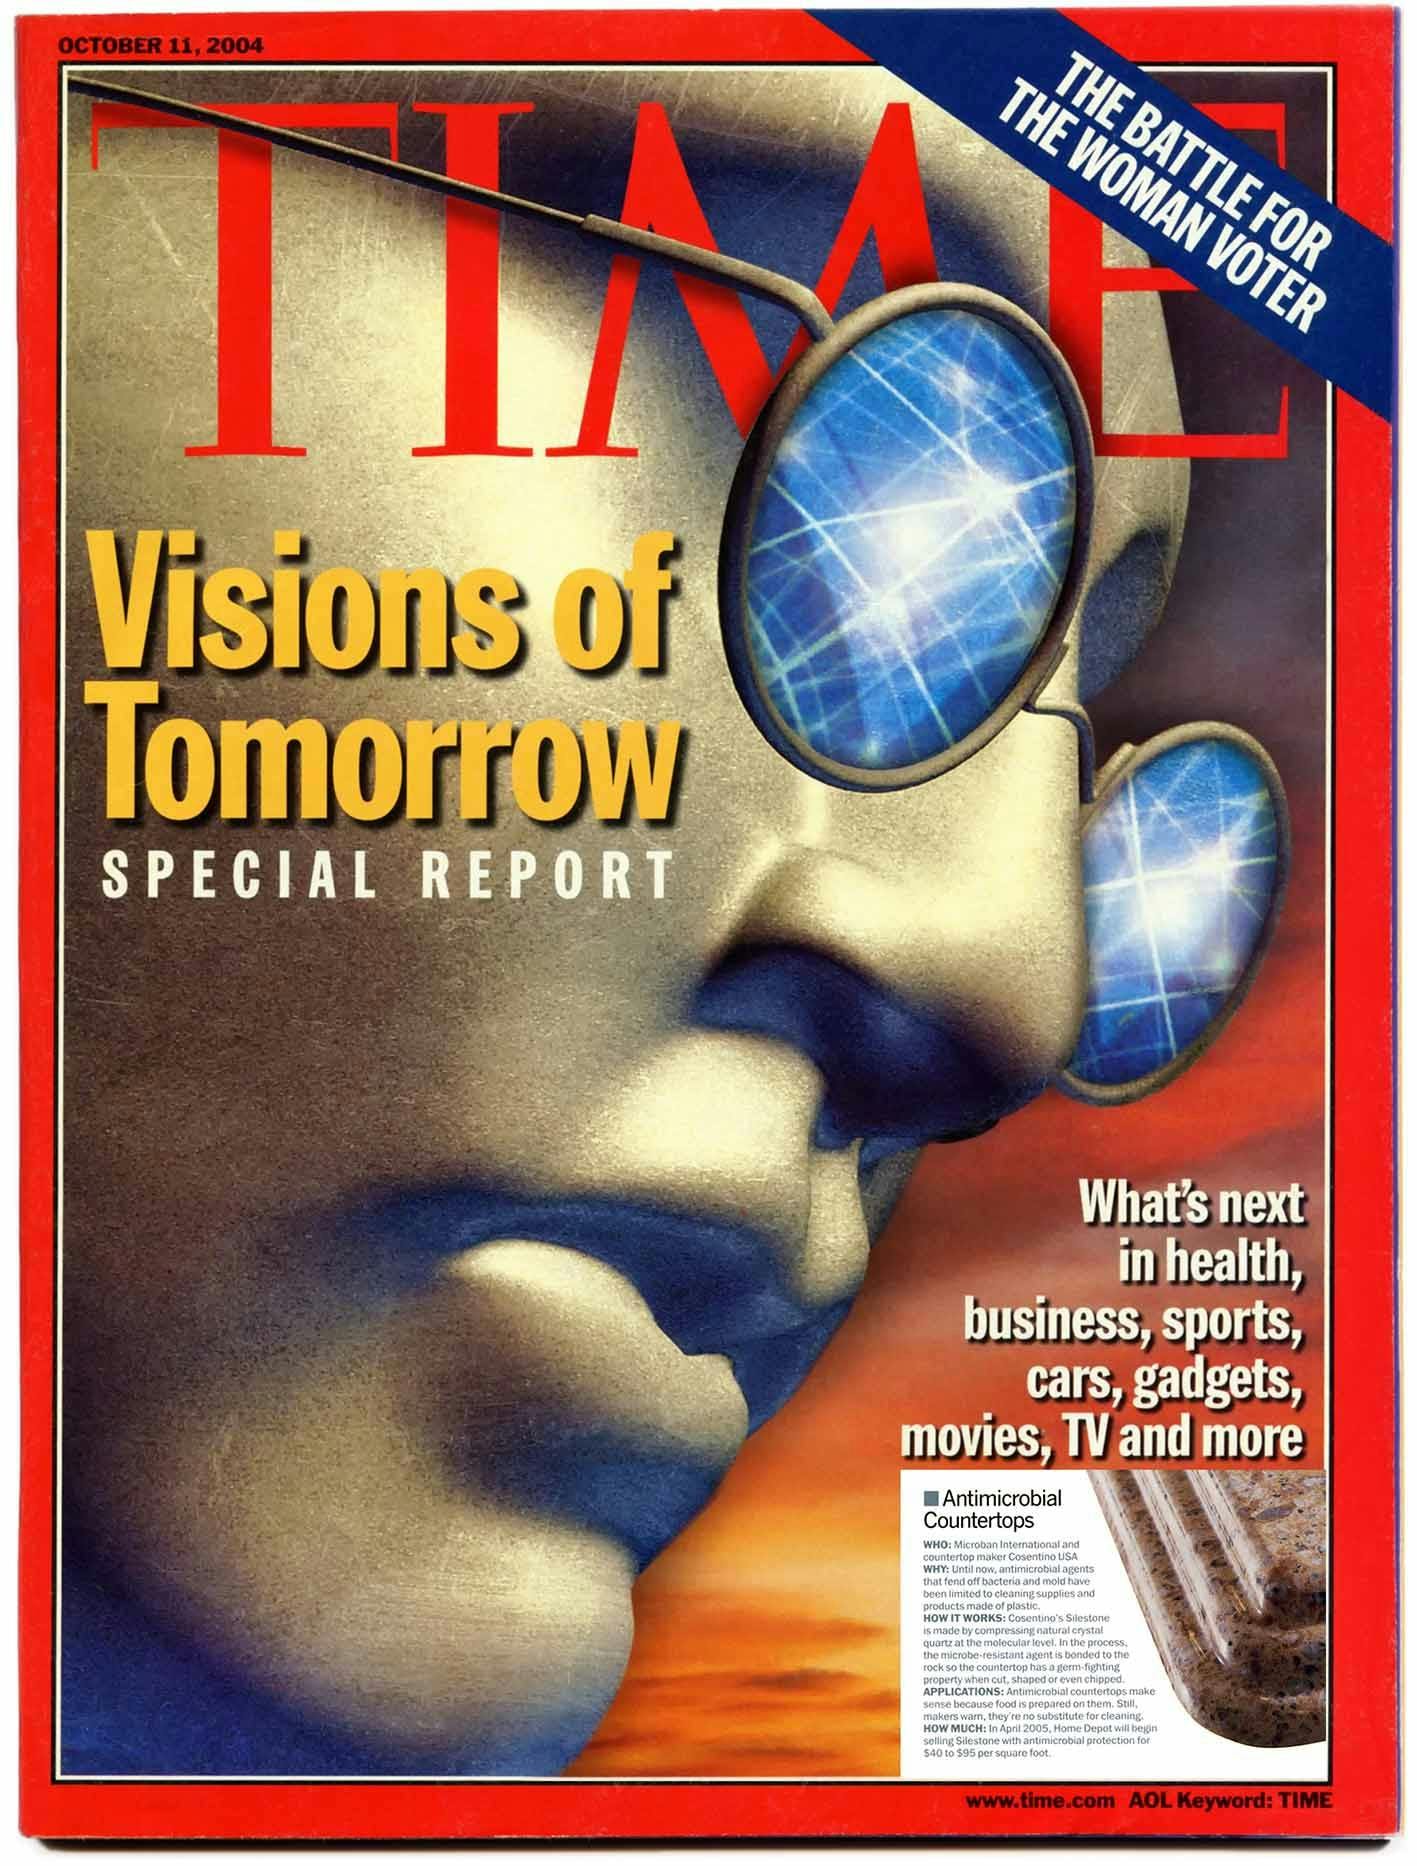 Image 38 of 2004 Revista Times Visions of Tomorrow baja 1 1 in Cosentino, 40 years of international growth and expansion - Cosentino